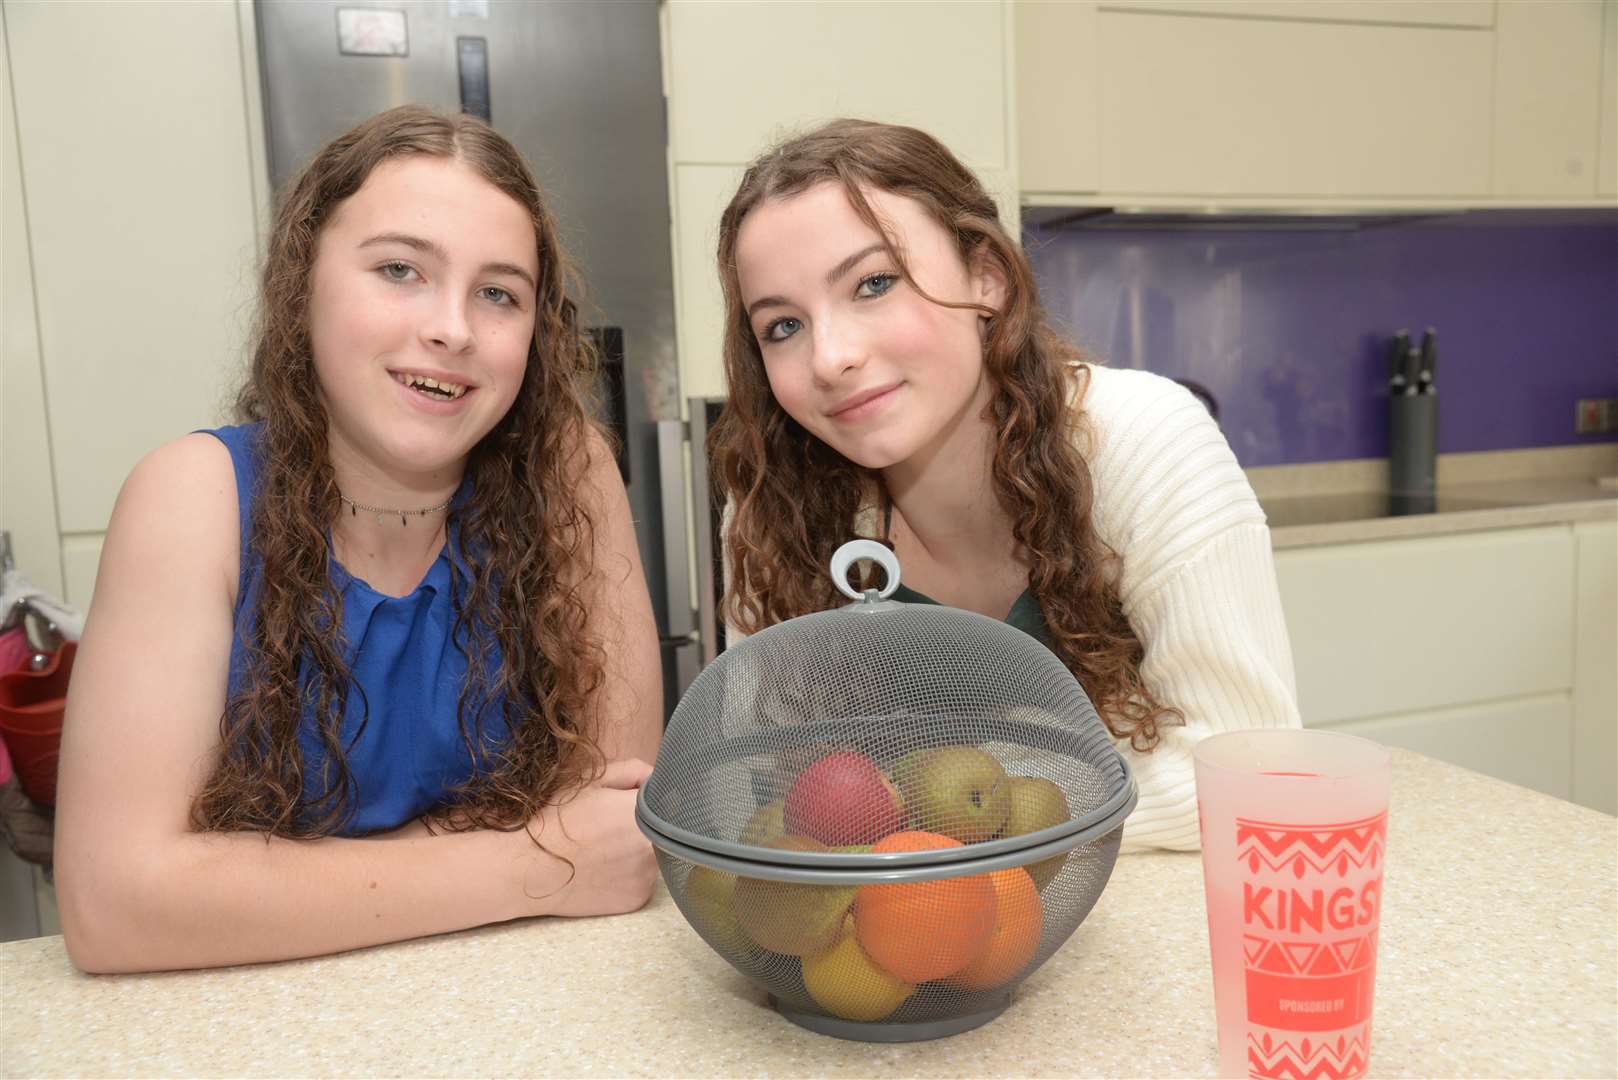 Olivia Evans from St Margarets-at-Cliffe, who has been chosen as the Wards Children's Award Young Fundraiser, pictured with sister Emily-Rose Evans. Picture:Chris Davey.